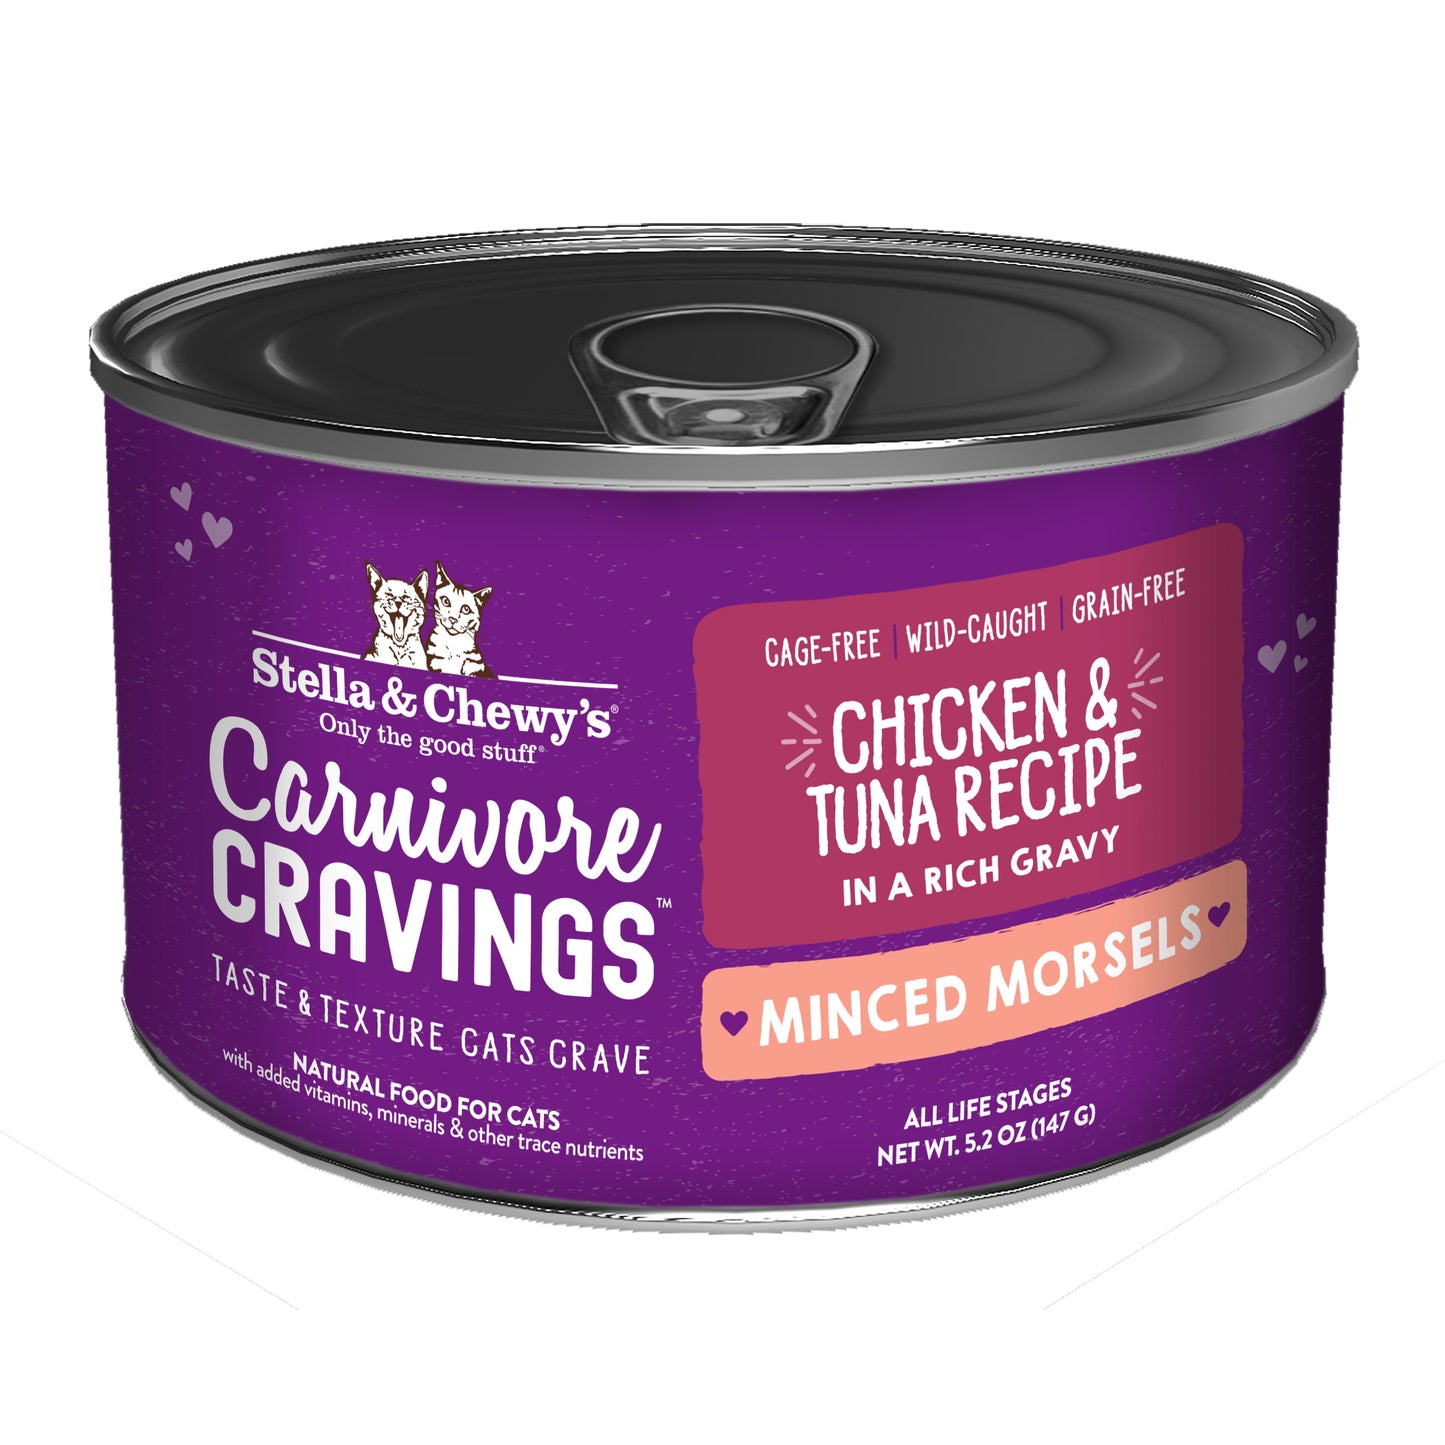 Stella and Chewy's Carnivore Cravings Minced Morsels Chicken & Tuna Recipe 5.2oz